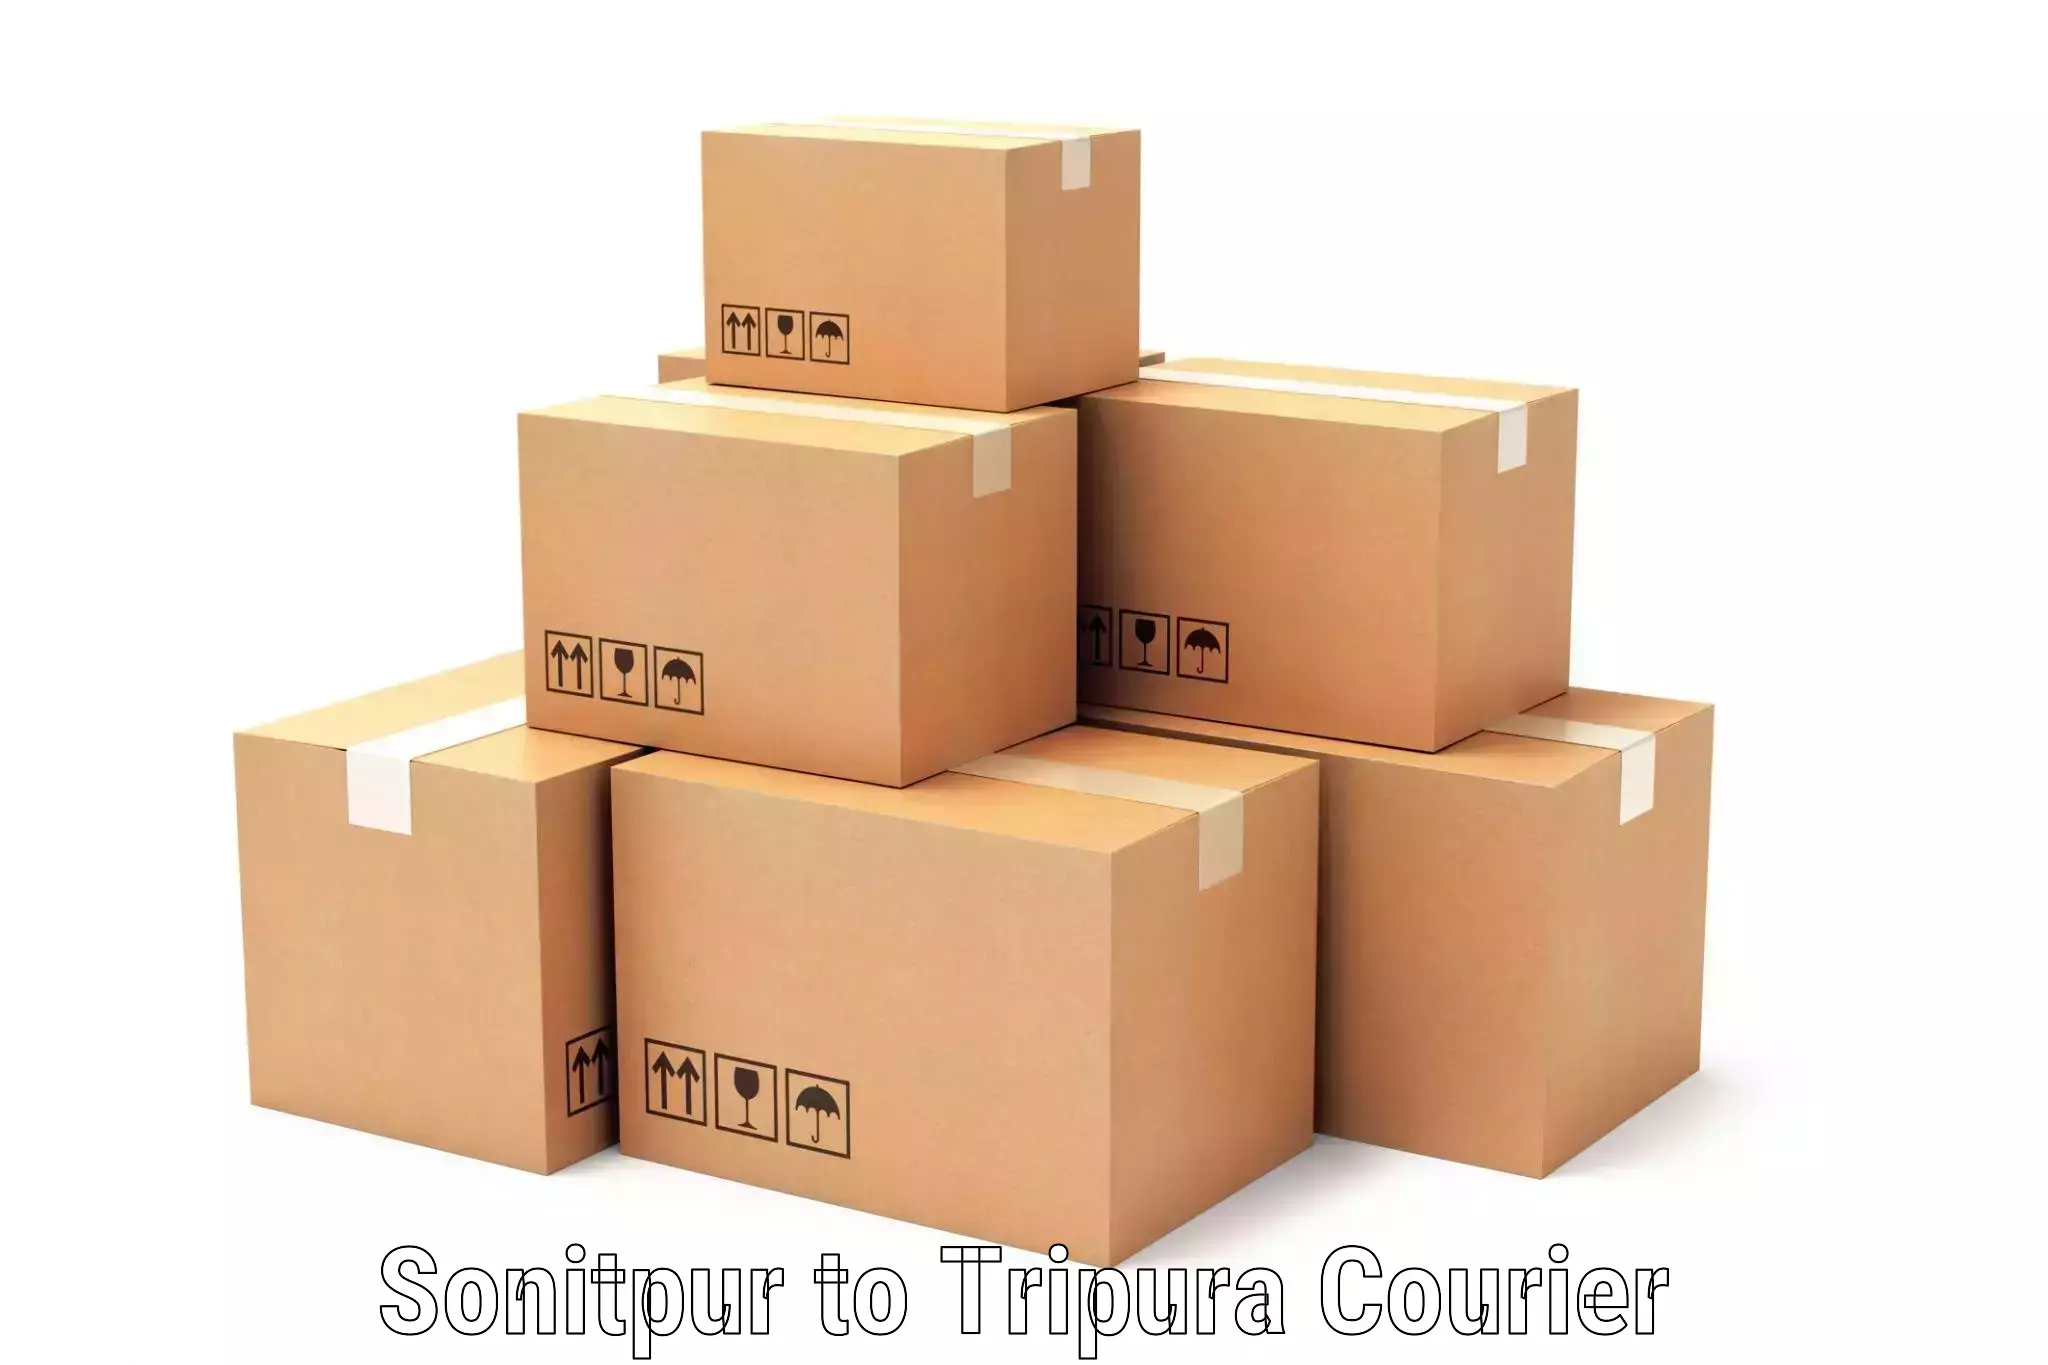 Courier service innovation Sonitpur to Tripura